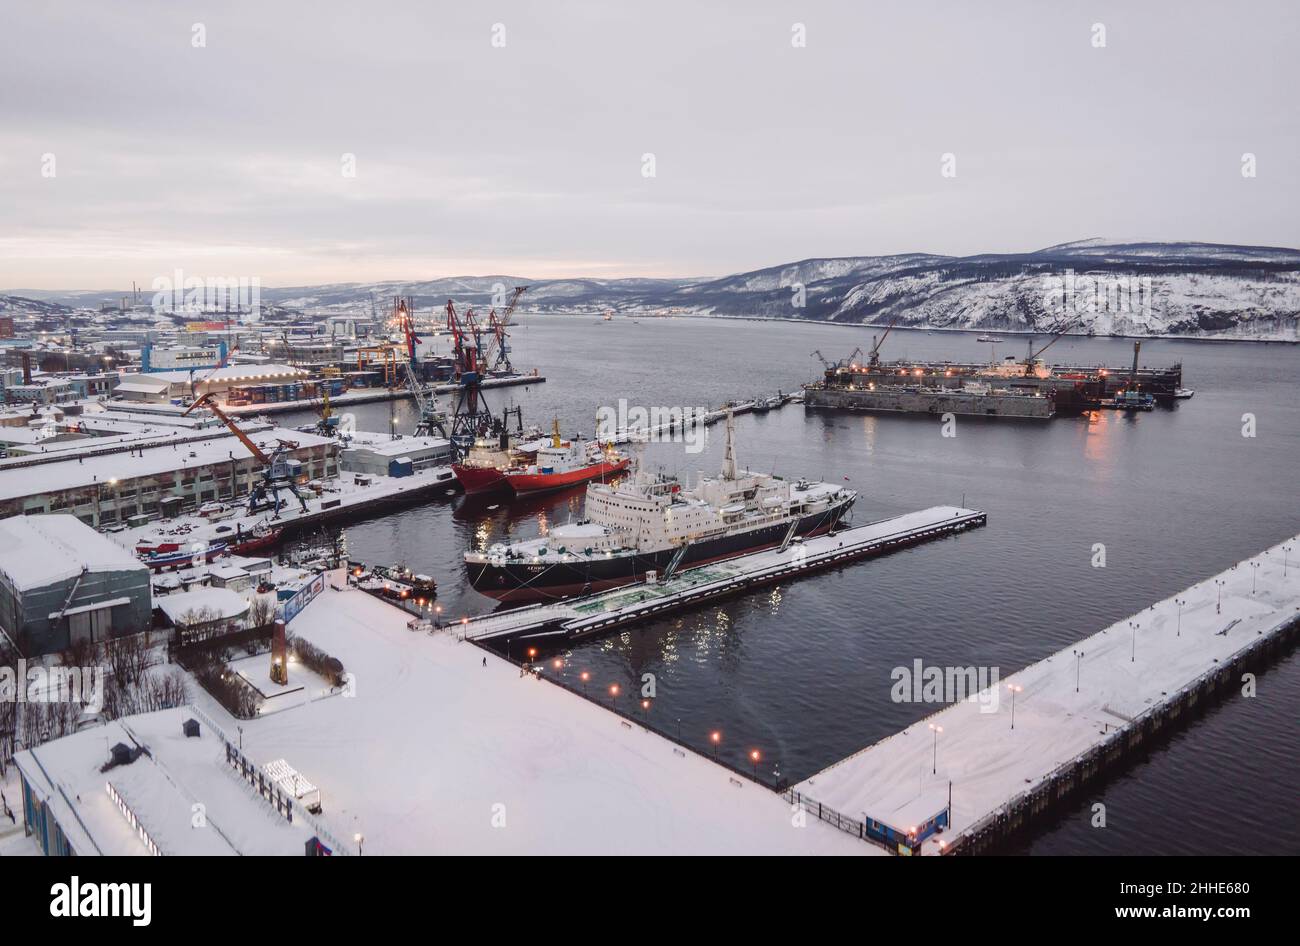 Lenin Soviet nuclear-powered icebreaker in port of Murmansk among the ships. Top view. Stock Photo